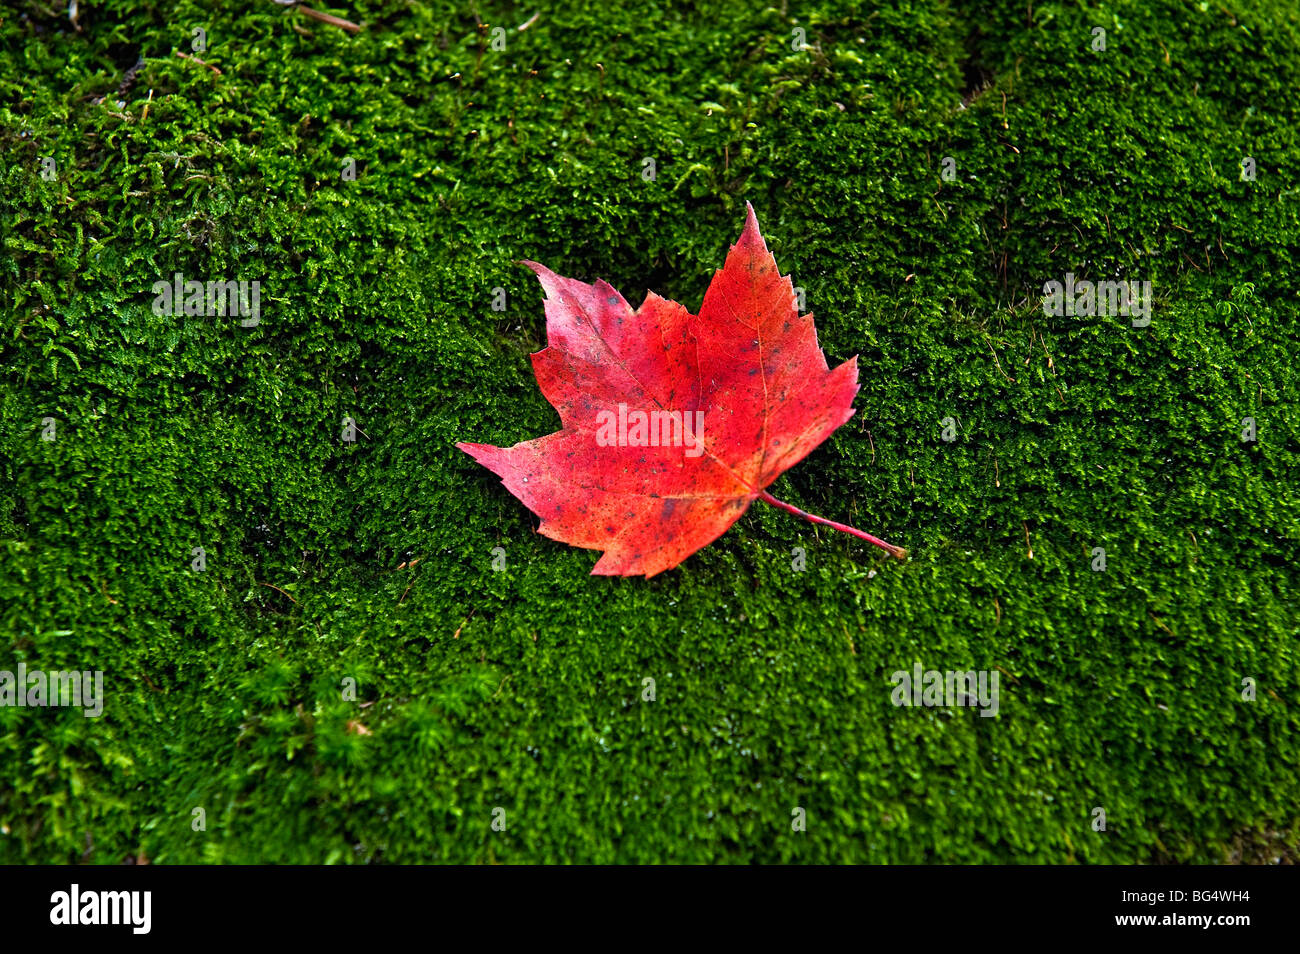 Red maple leaf on a bed of green moss. Stock Photo